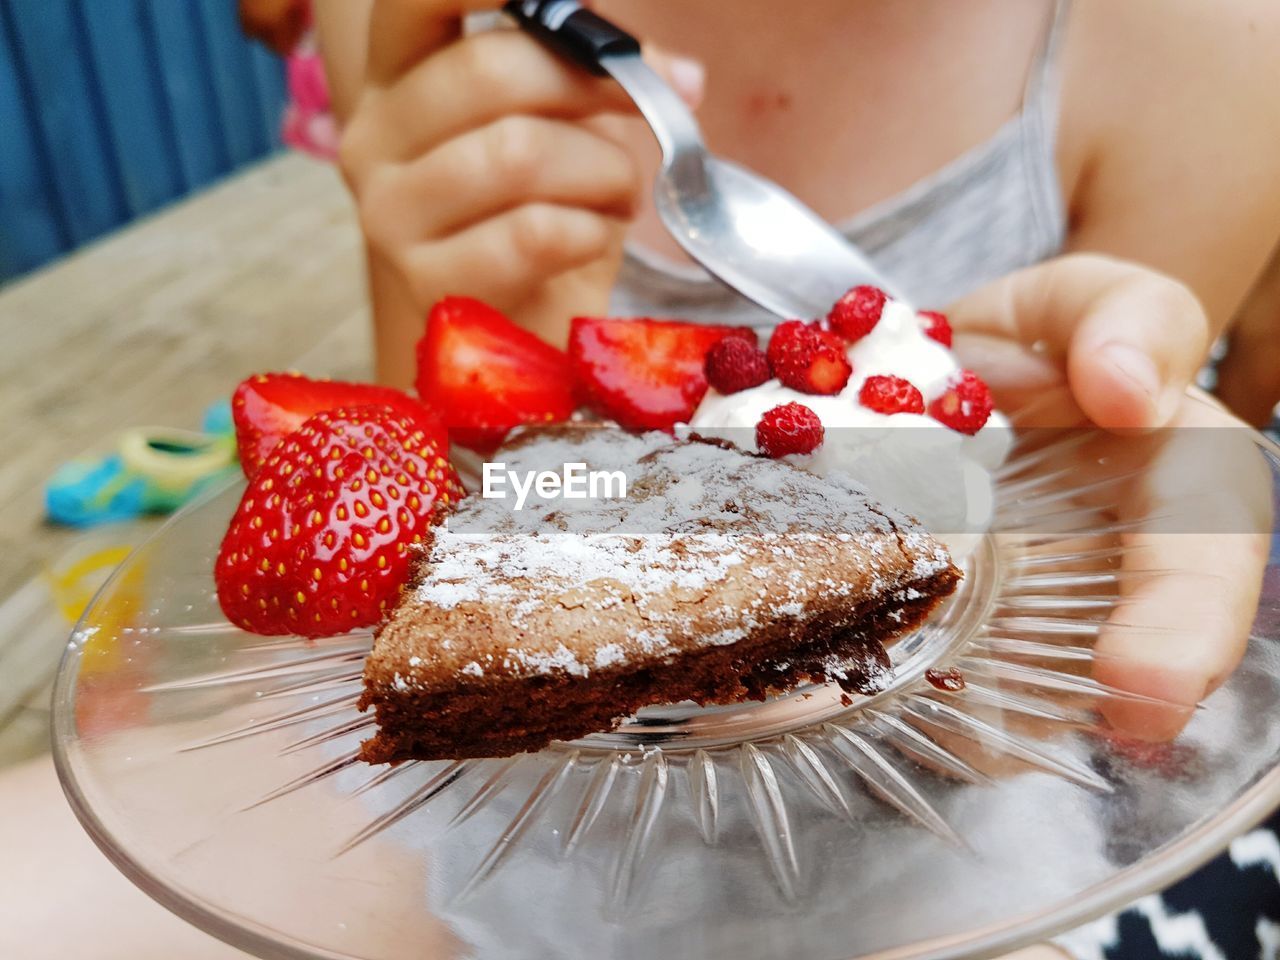 Midsection of woman holding dessert in plate